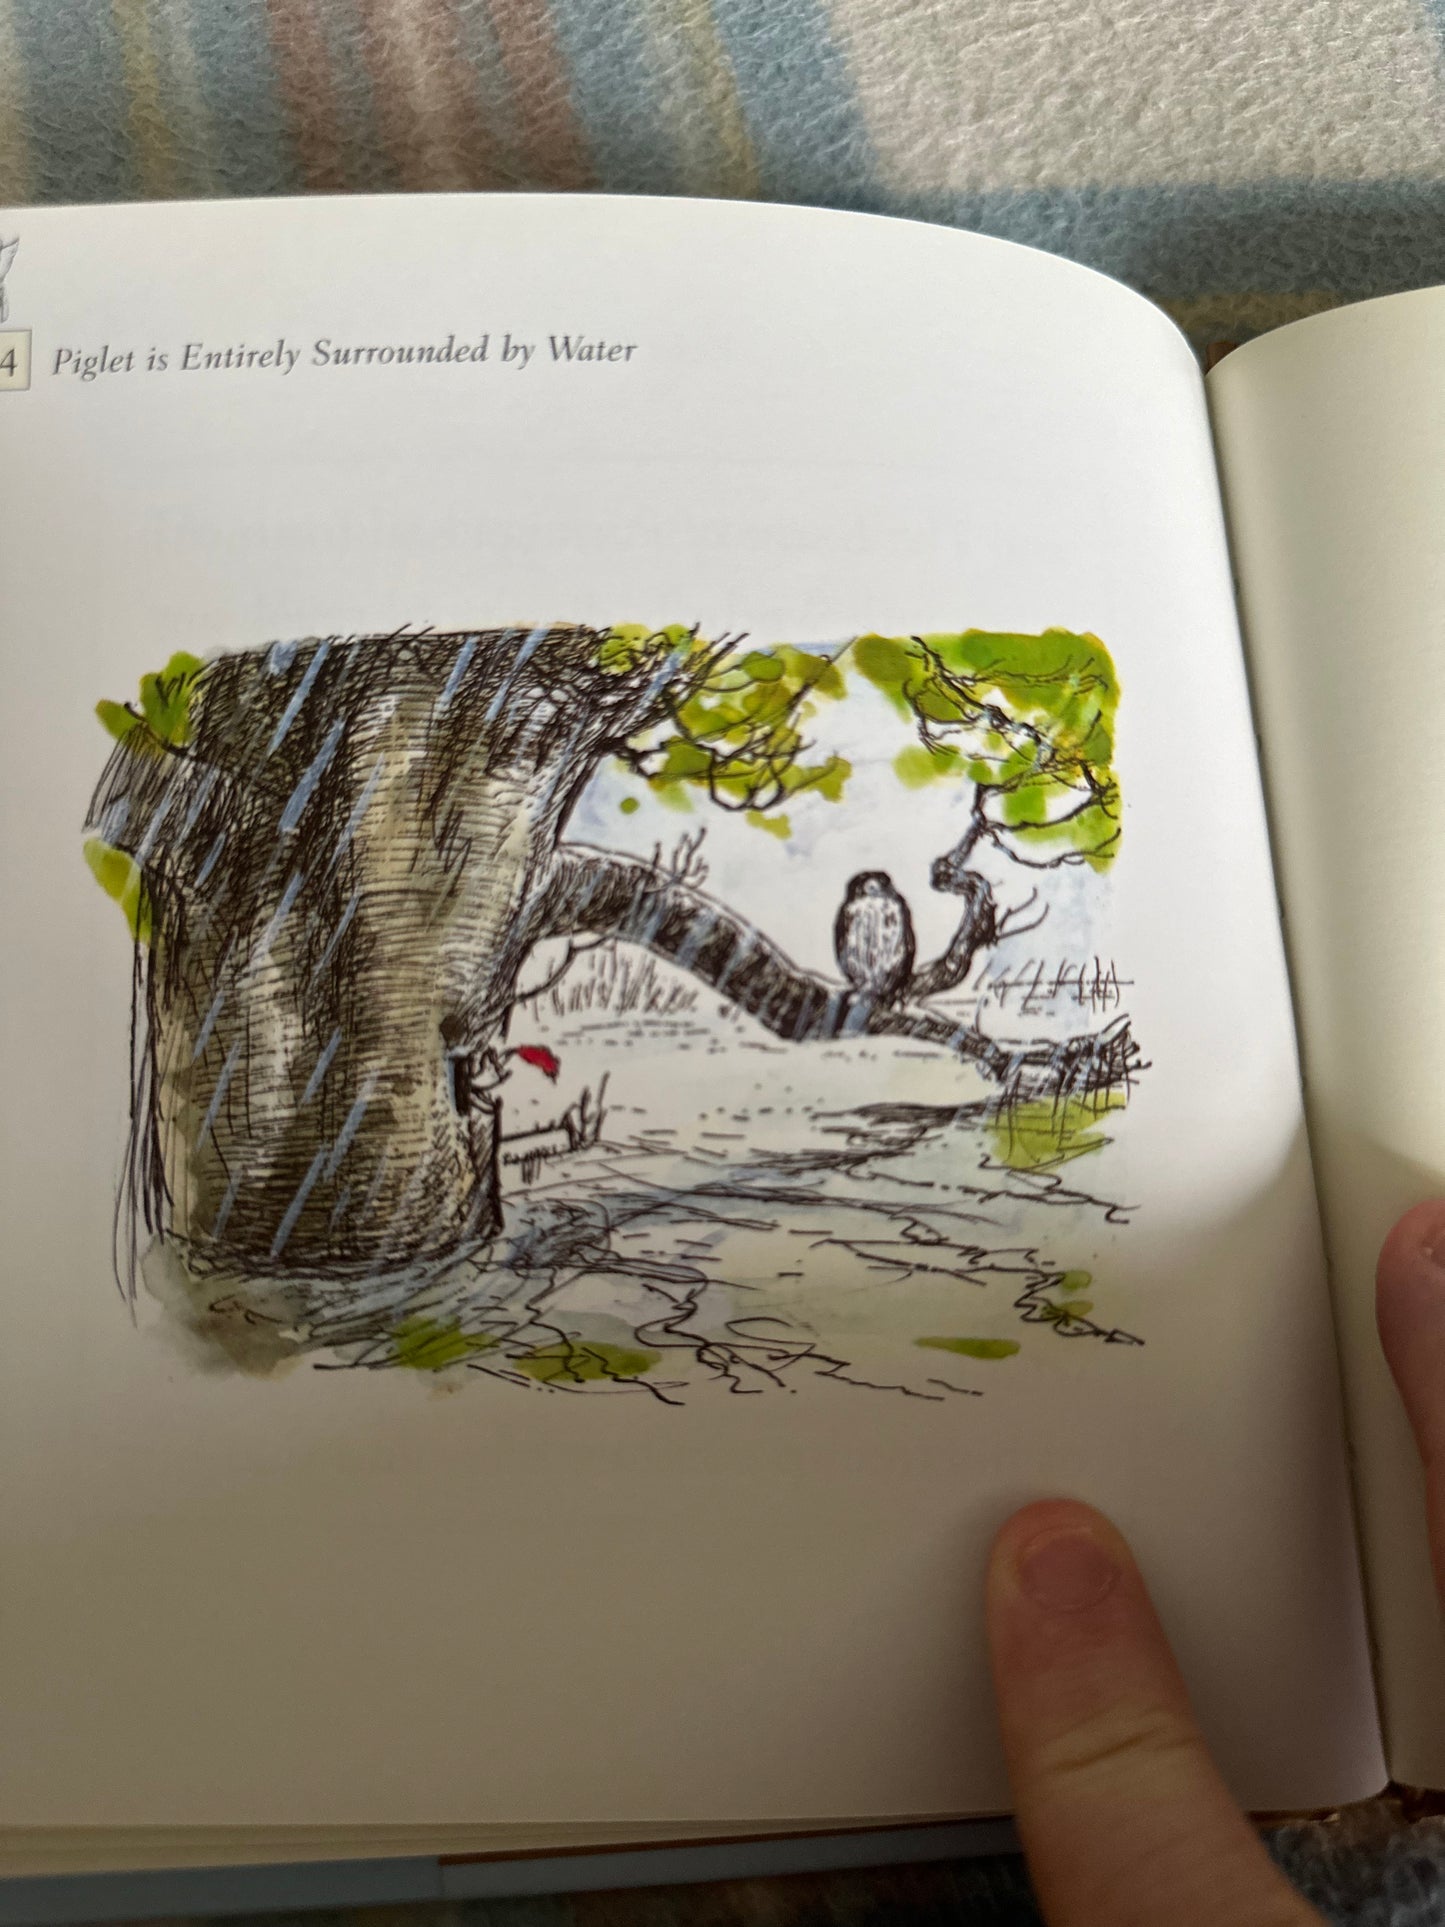 2003 Piglet Is Entirely Surrounded By Water - A.A. Milne(Ernest Shepard illustration) Egmont publisher